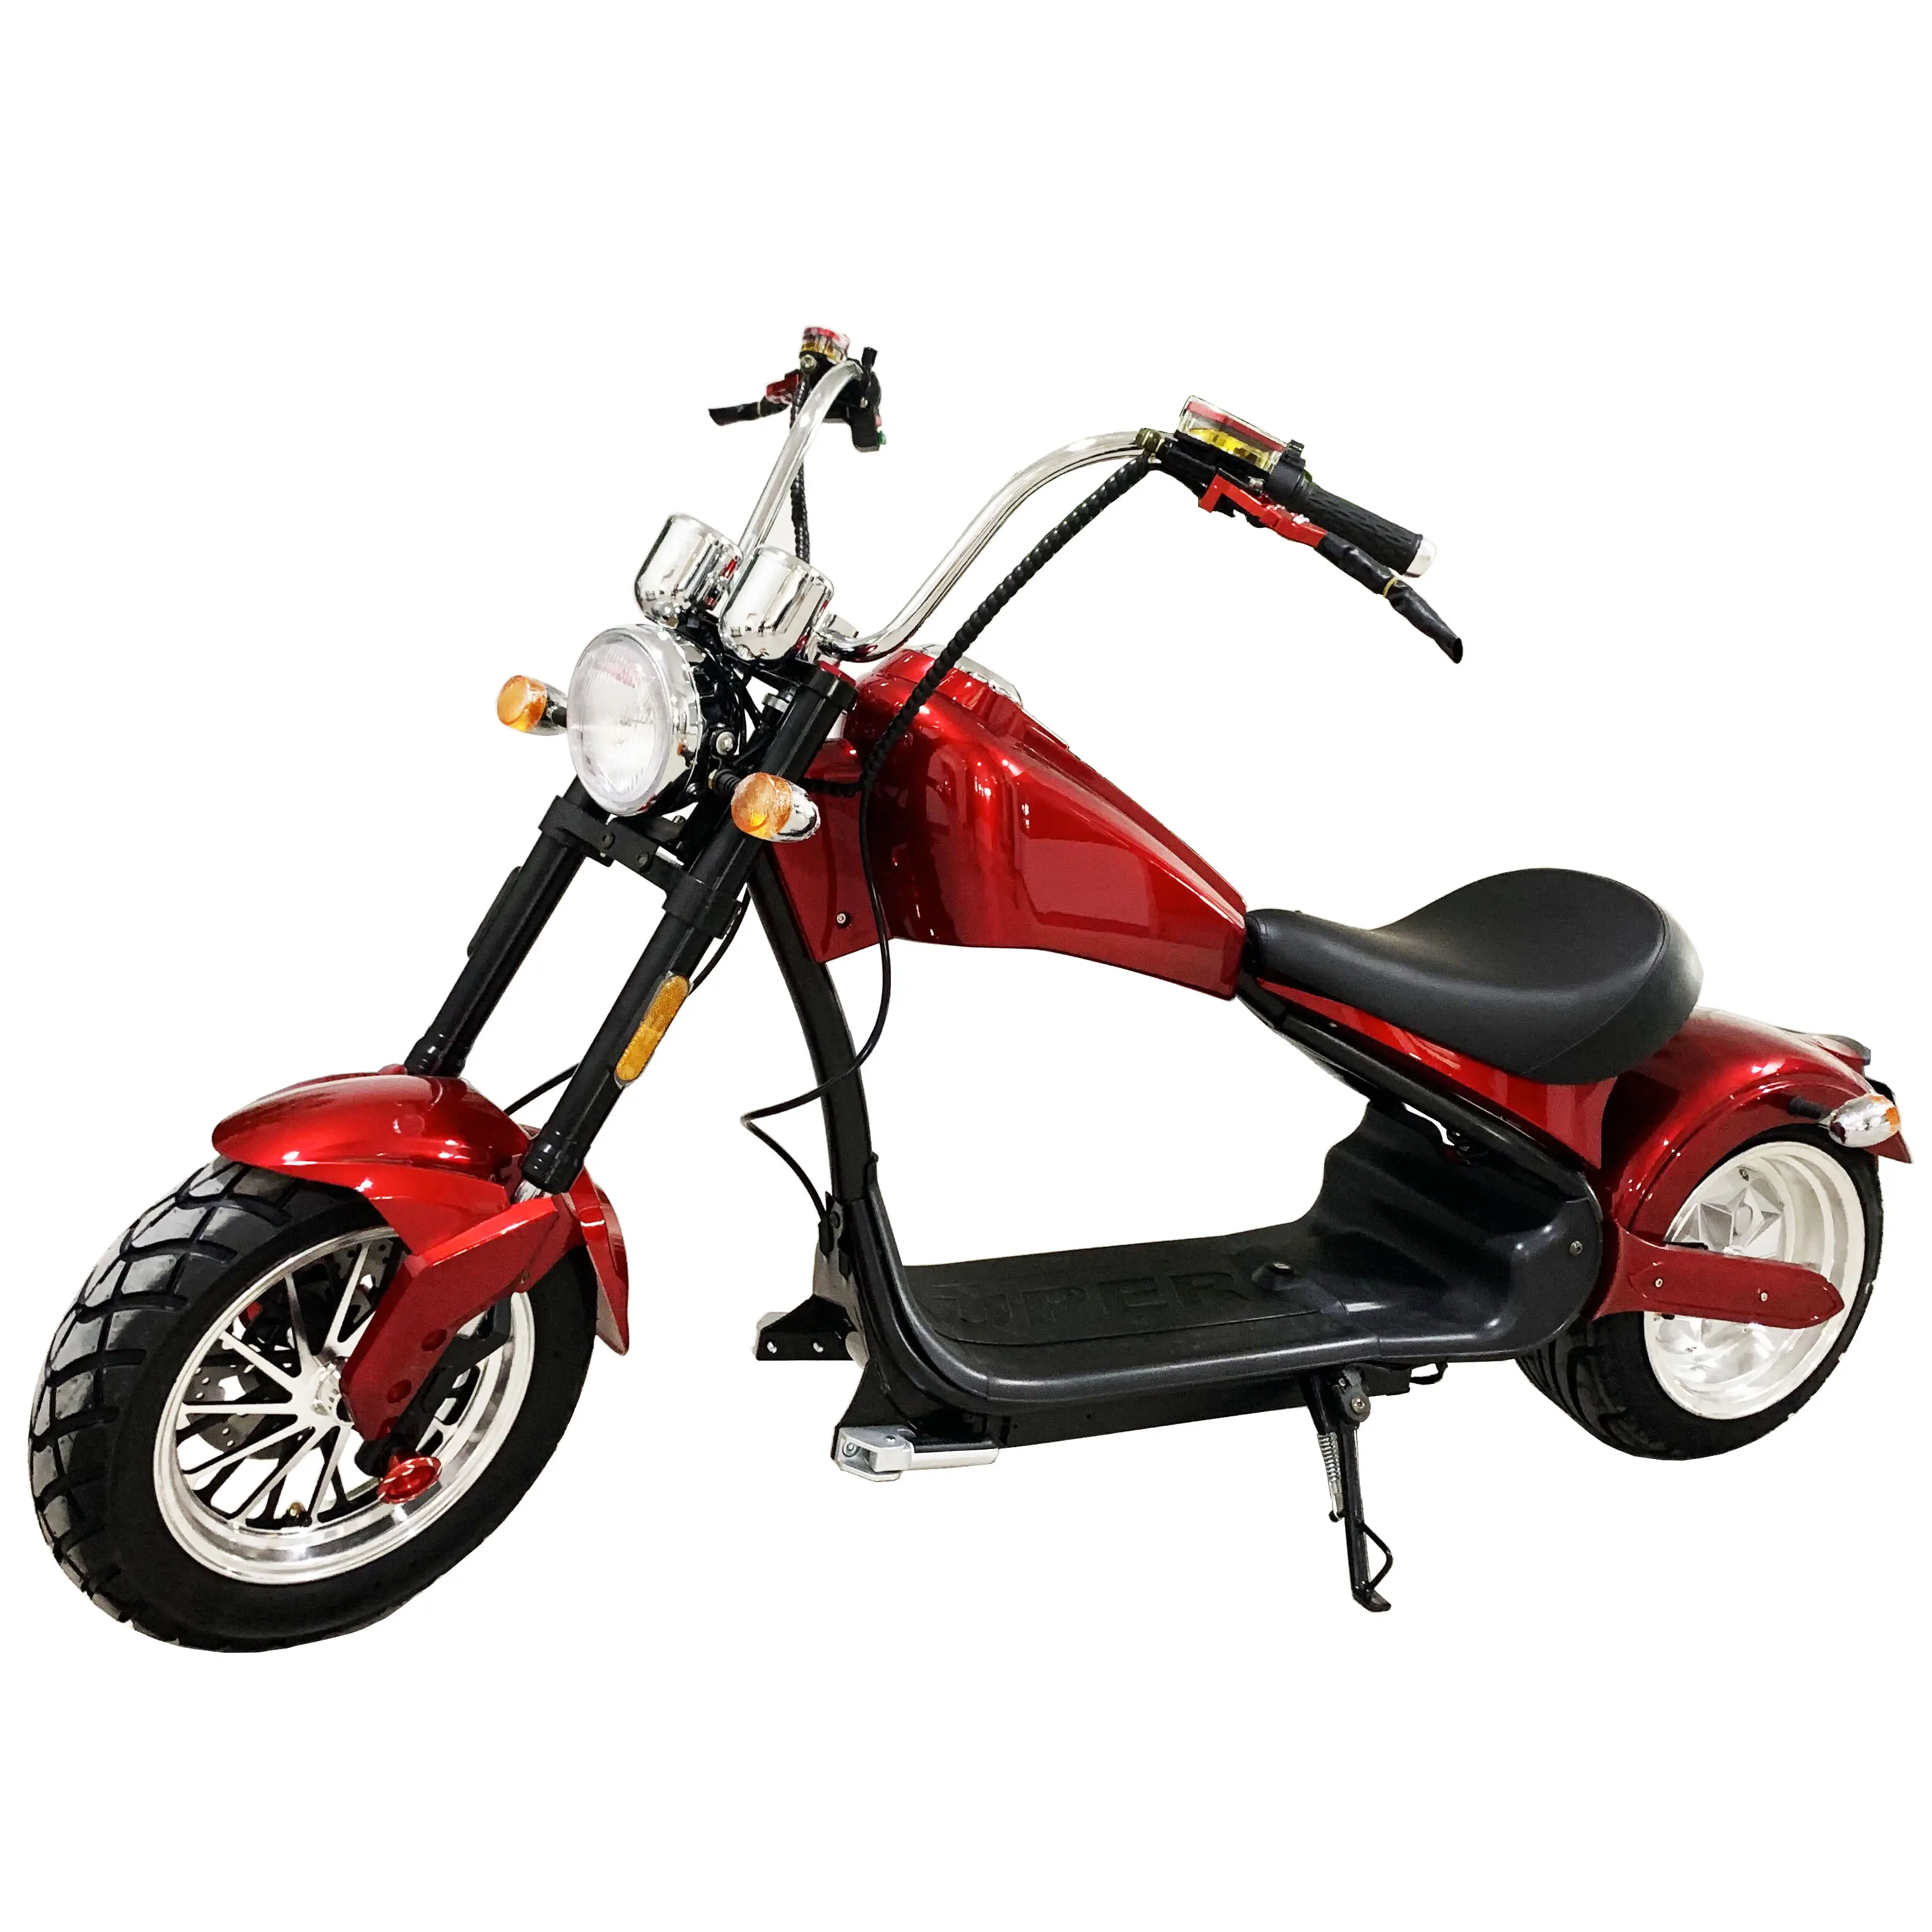 2019 New Model Citycoco 2000W 20AH Removable Battery Scooter Electric Motorcycle